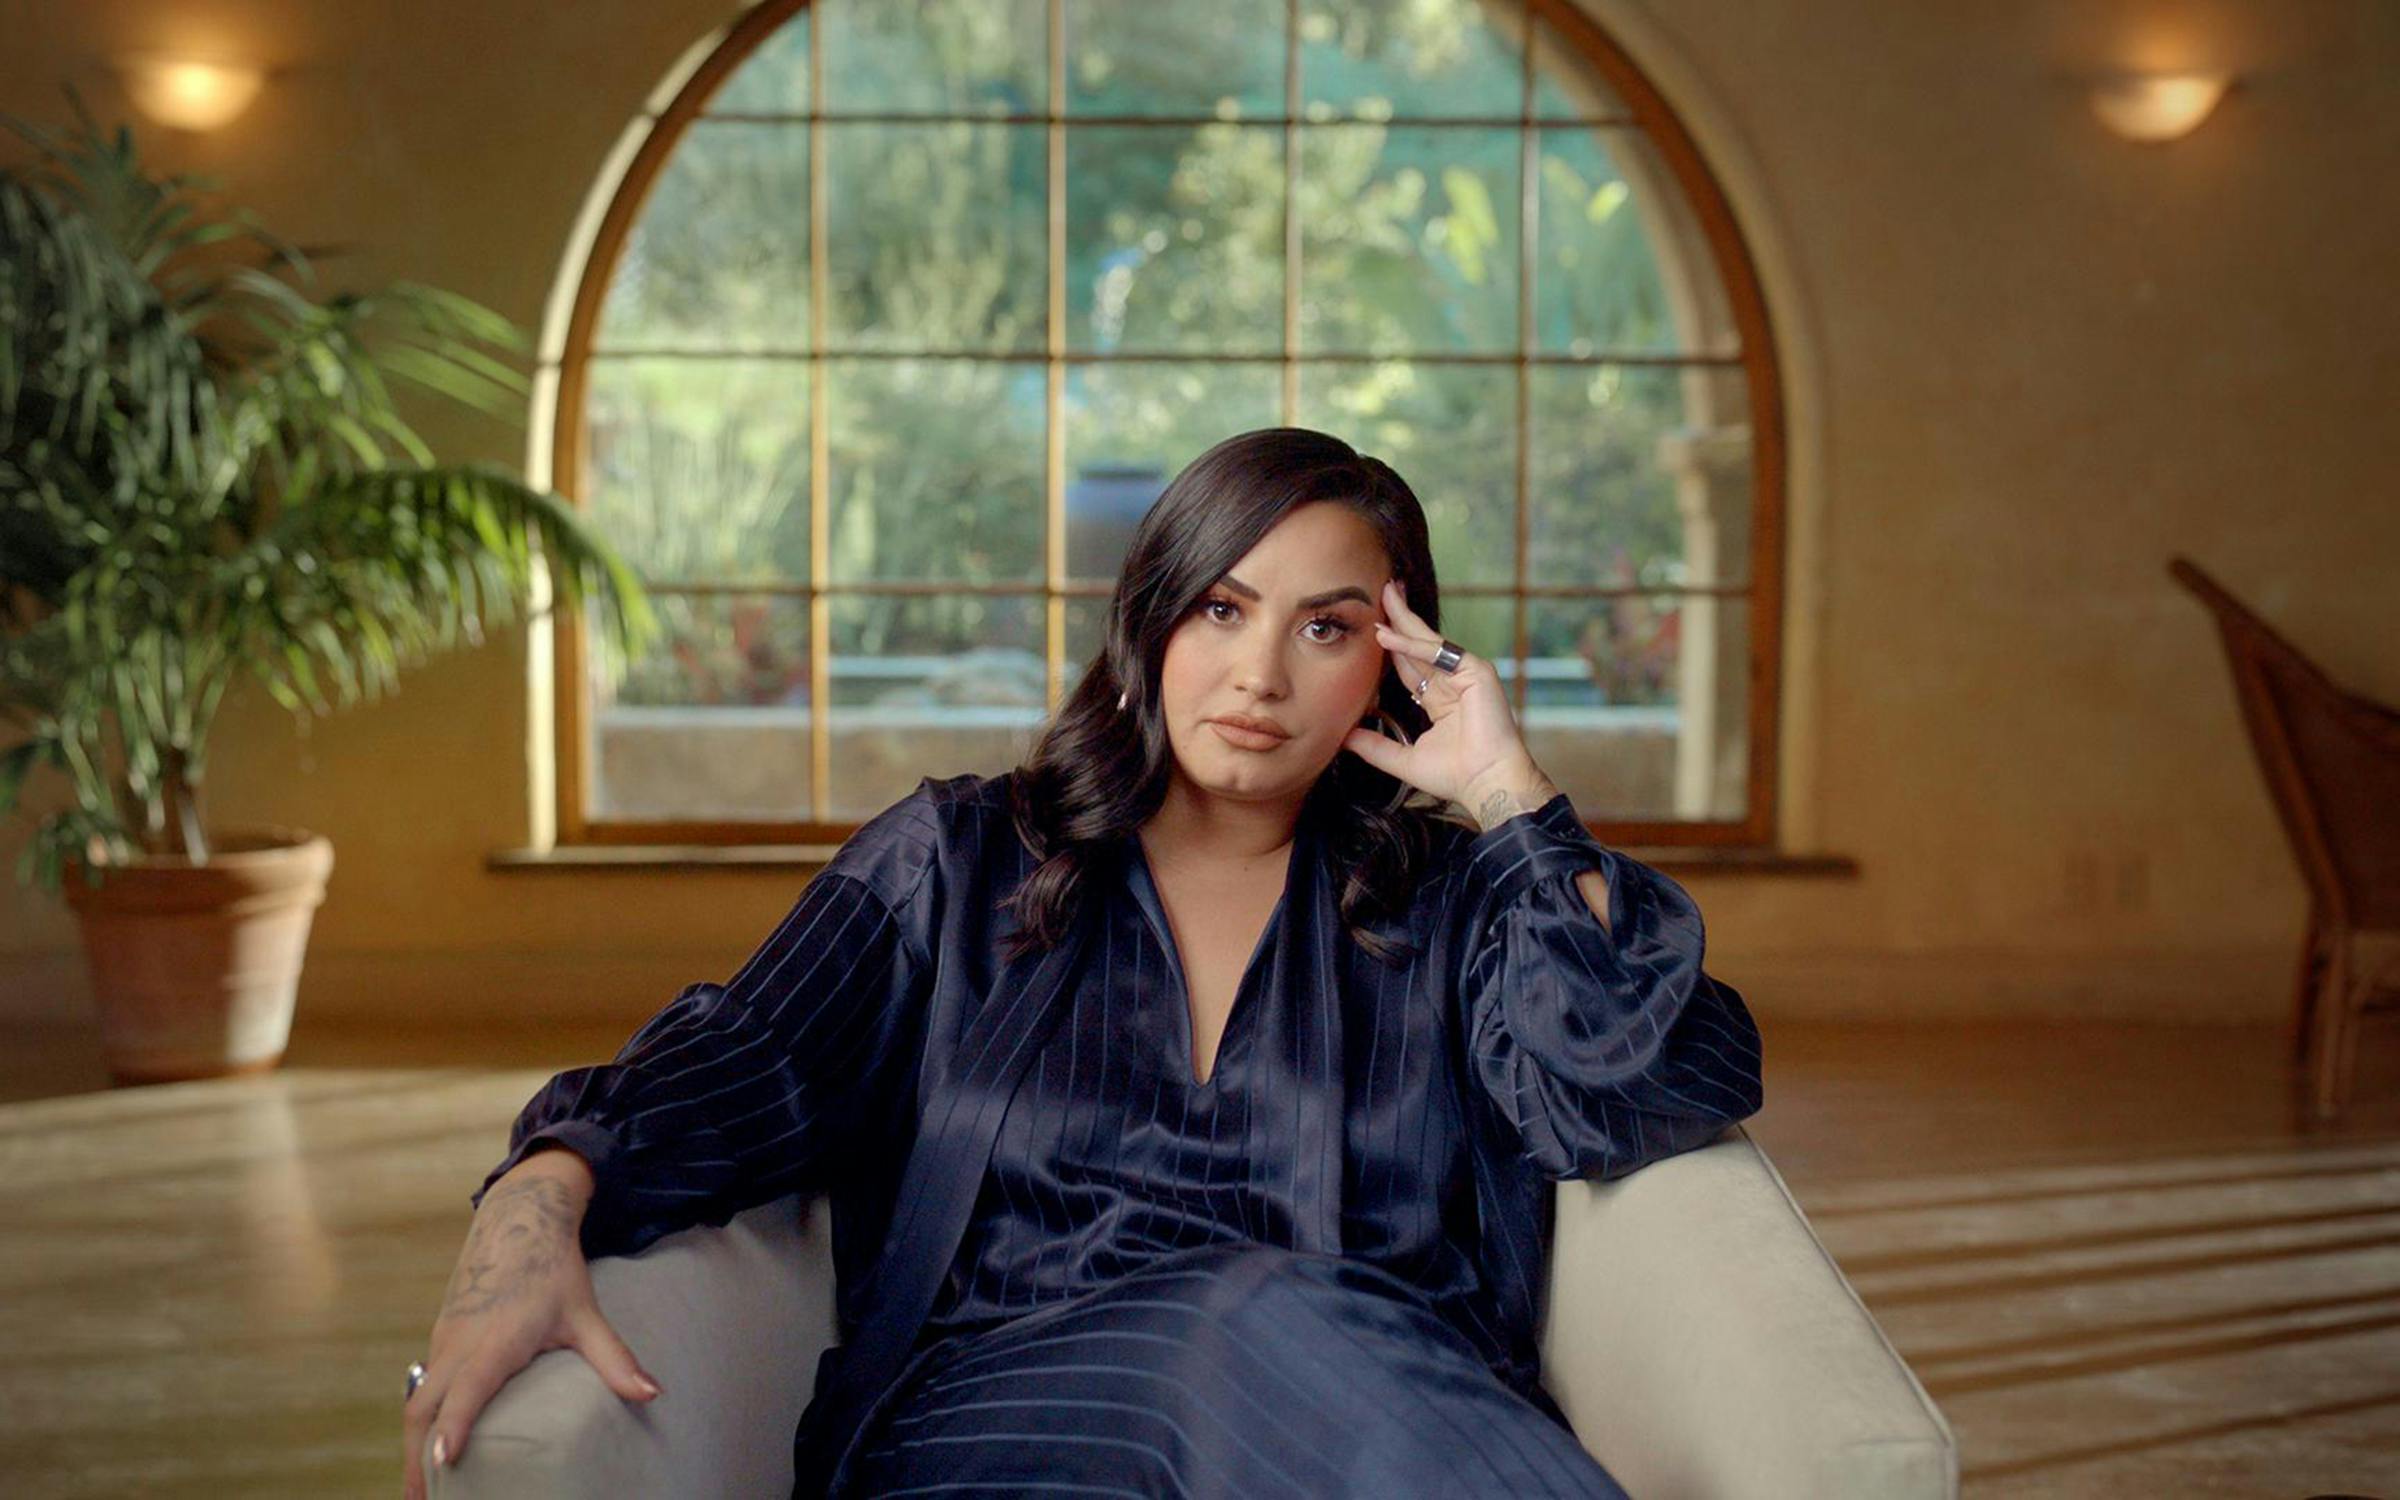 Demi Lovato Reveals the One Thing She'd Tell Her Teenage Self